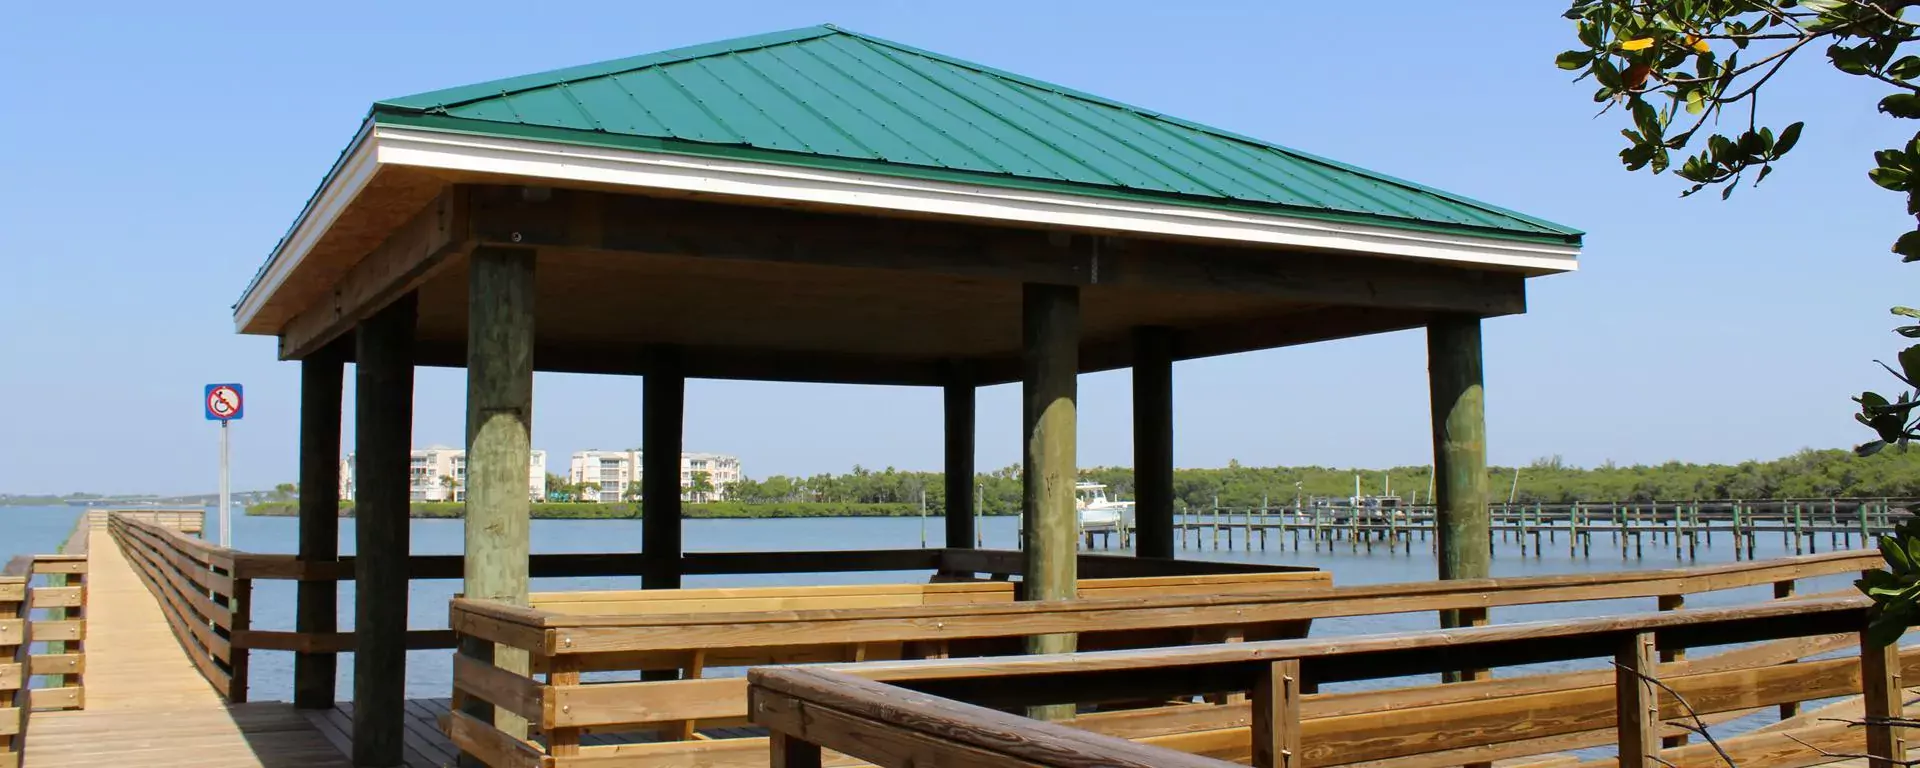 A pavilion at Clifton S. Perry Beach